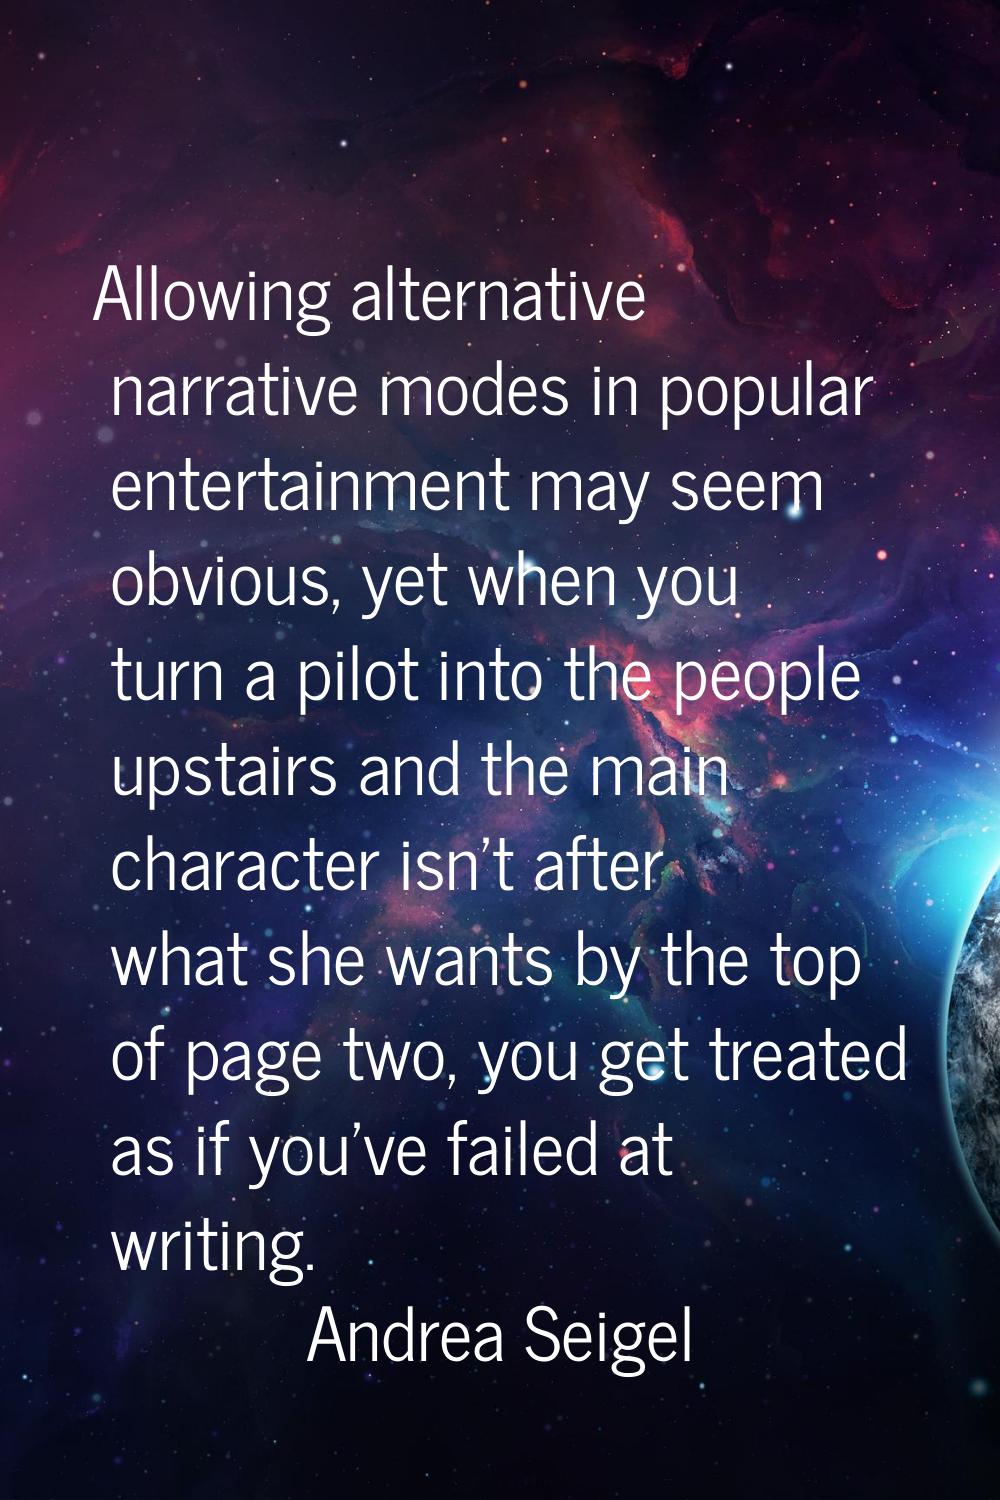 Allowing alternative narrative modes in popular entertainment may seem obvious, yet when you turn a